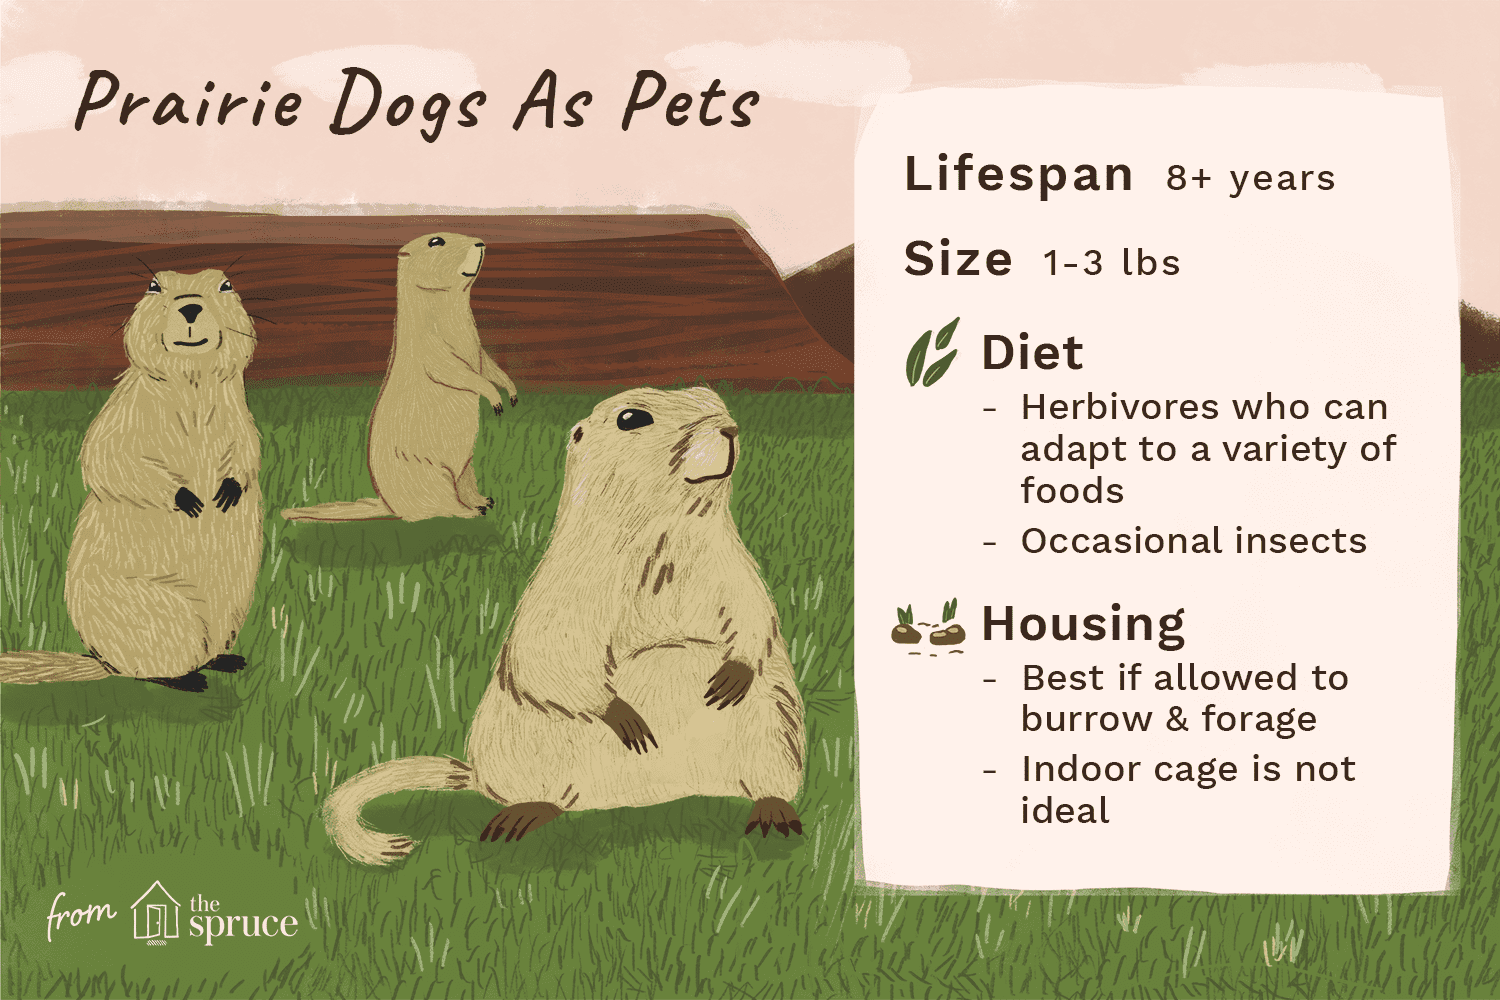 Prairie dogs as pets illustration